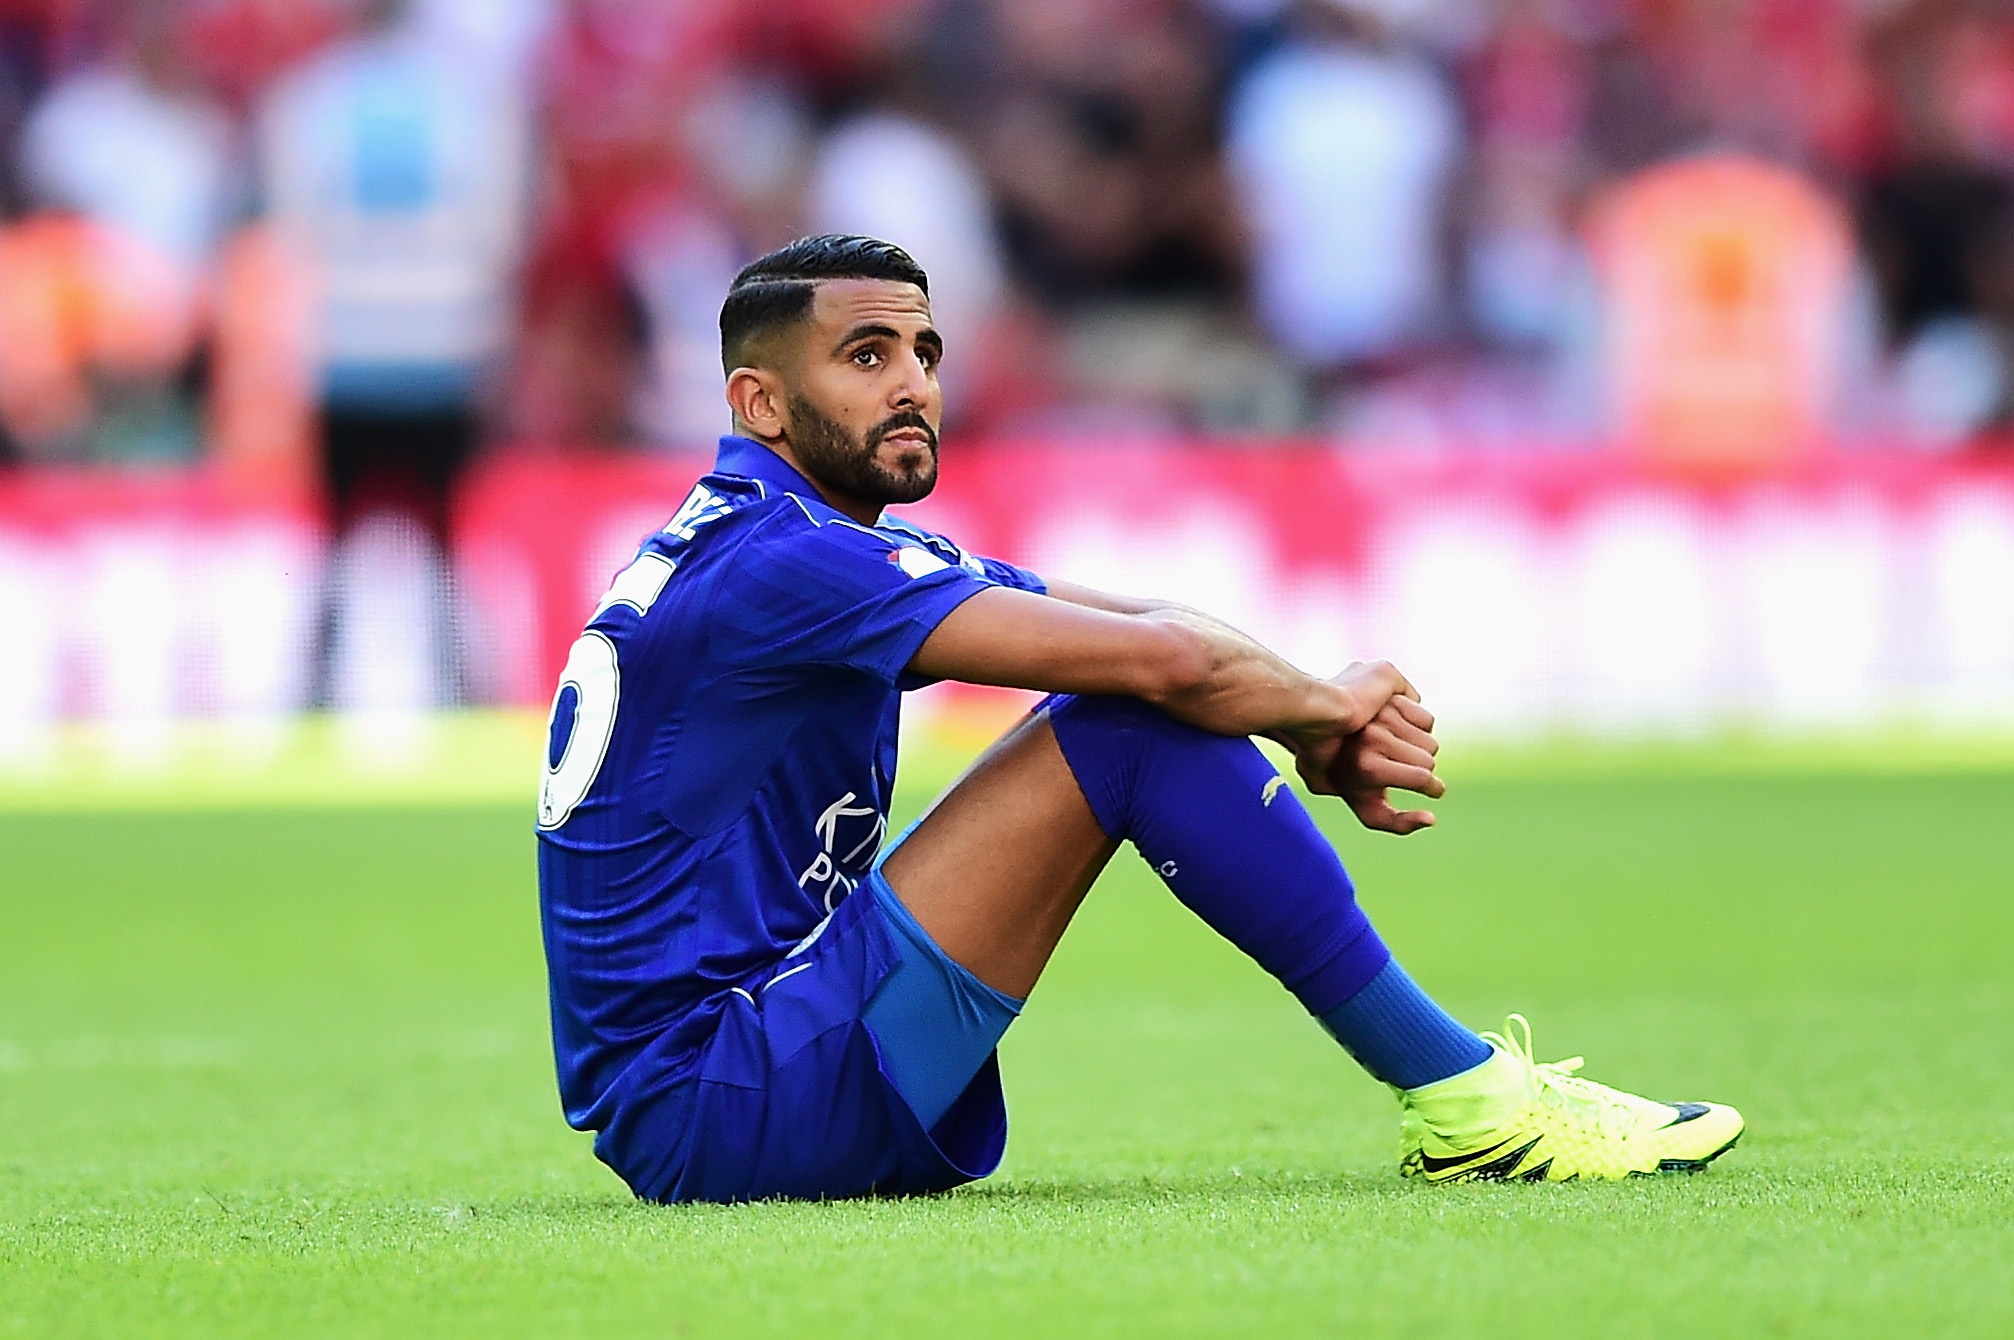 LONDON, ENGLAND - AUGUST 07: Riyad Mahrez of Leicester City show emotion after the final whistle during The FA Community Shield match between Leicester City and Manchester United at Wembley Stadium on August 7, 2016 in London, England.  (Photo by Alex Broadway/Getty Images)